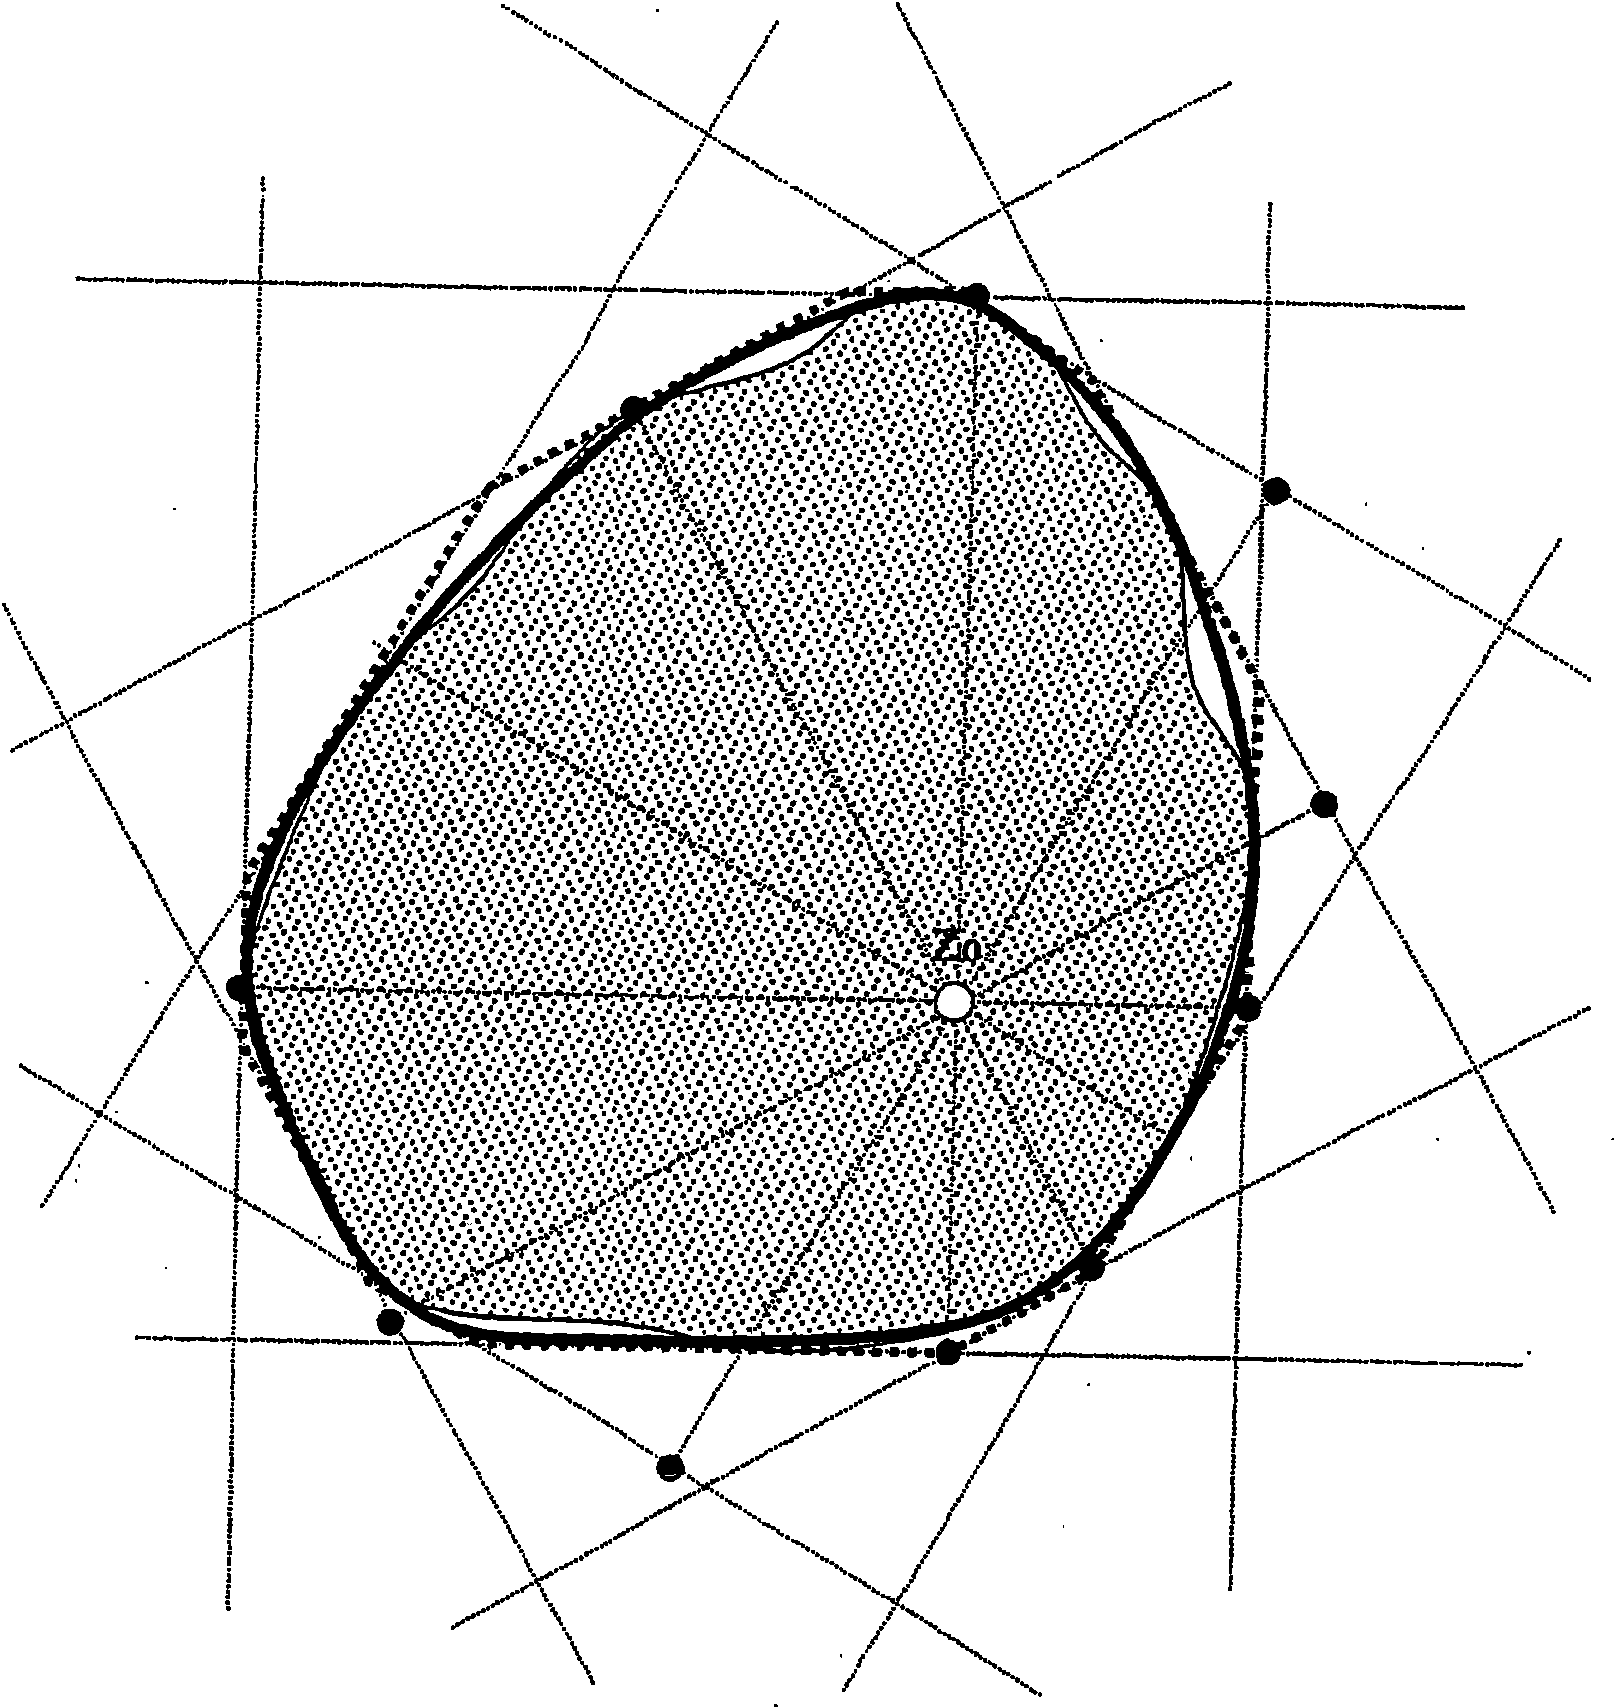 Method for measuring the shpericity of spherical profiles